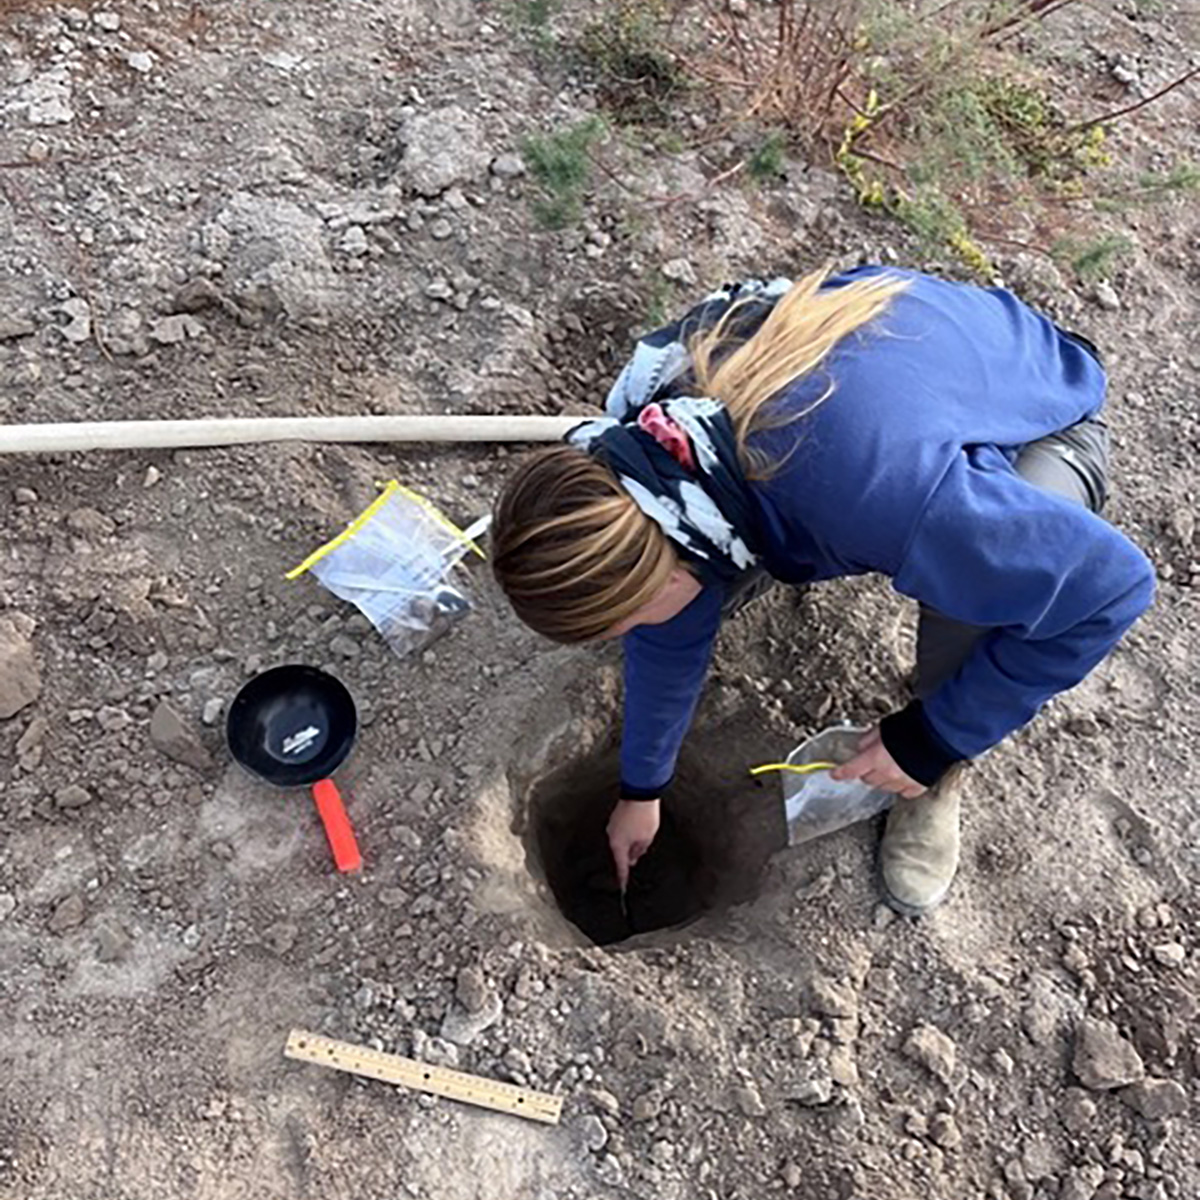 A woman digs a hole in rocky ground.